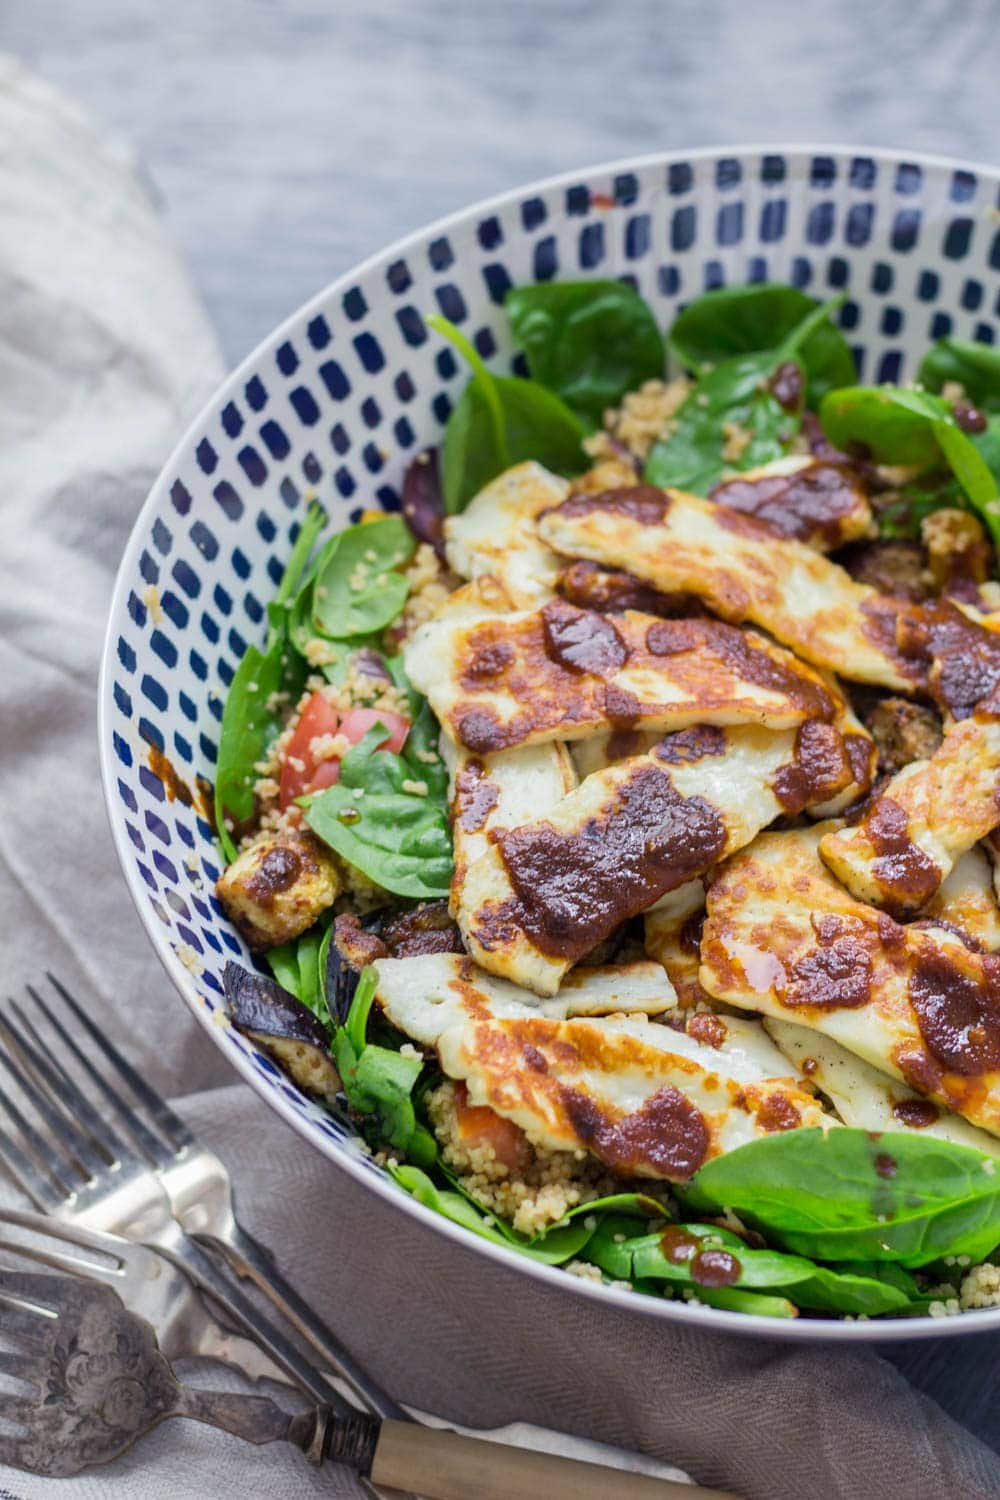 This harissa halloumi salad is so quick to make and is bursting with healthy ingredients! The salty halloumi is the perfect addition to this vegetarian dish. #vegetarian #salad #healthy #halloumi